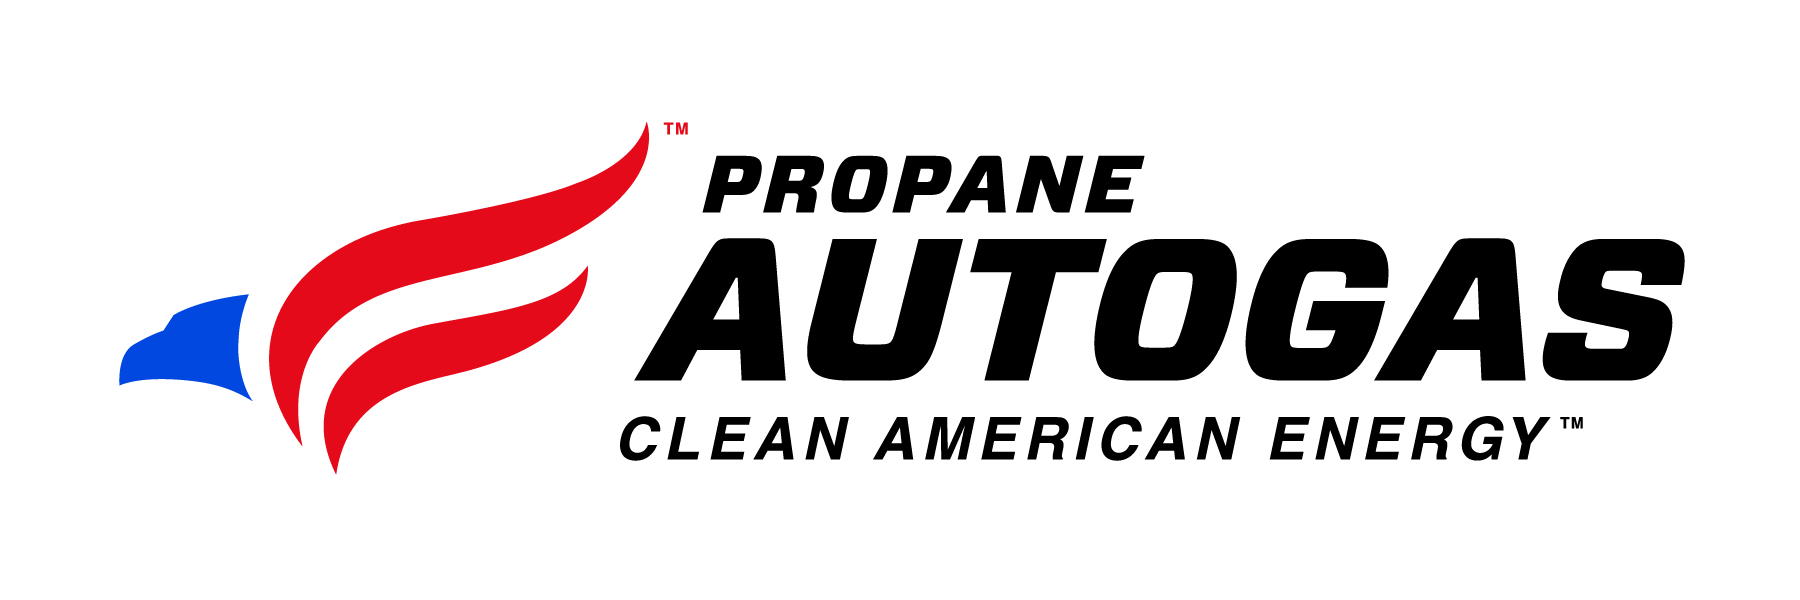 Free Webinar On Sustainable Propane Autogas Fleets. Propane LPG as a Transportation Fuel Deployment Considerations, Best Practices & Best Applications Wednesday, January 23, 2018 FREE